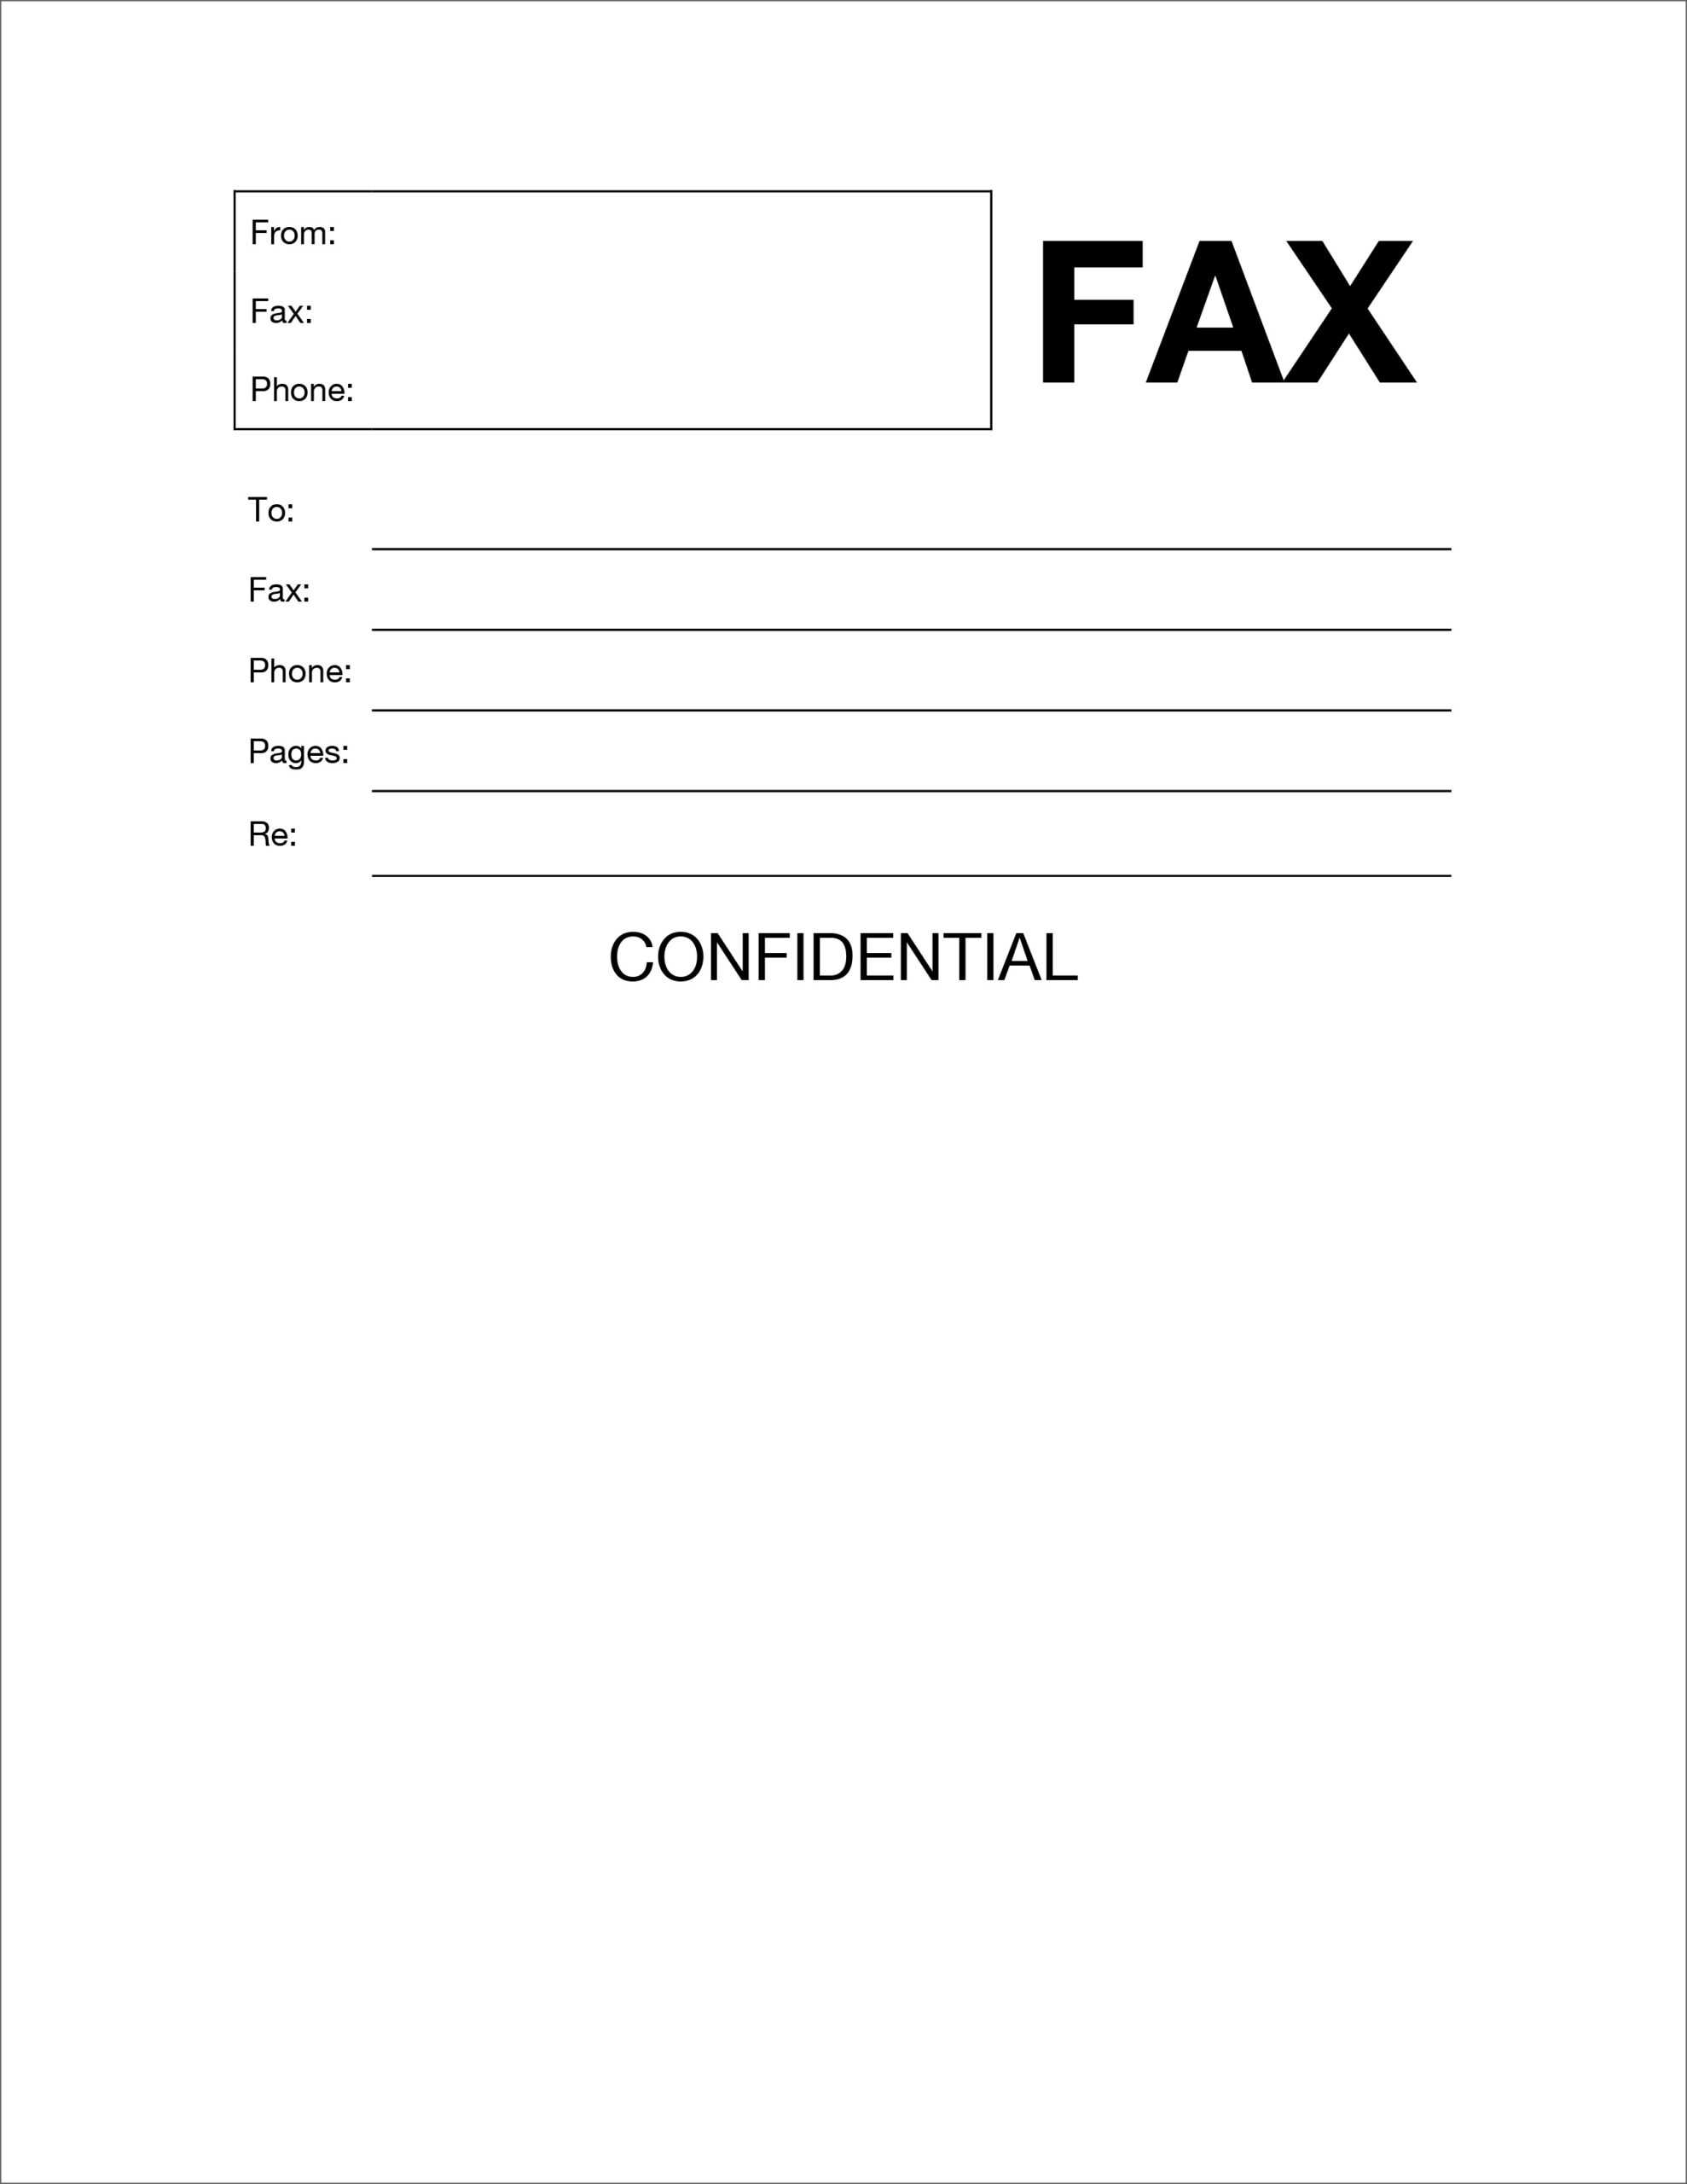 004 Fax Cover Sheet Template Ideas Formidable Word 2010 Pertaining To Fax Cover Sheet Template Word 2010